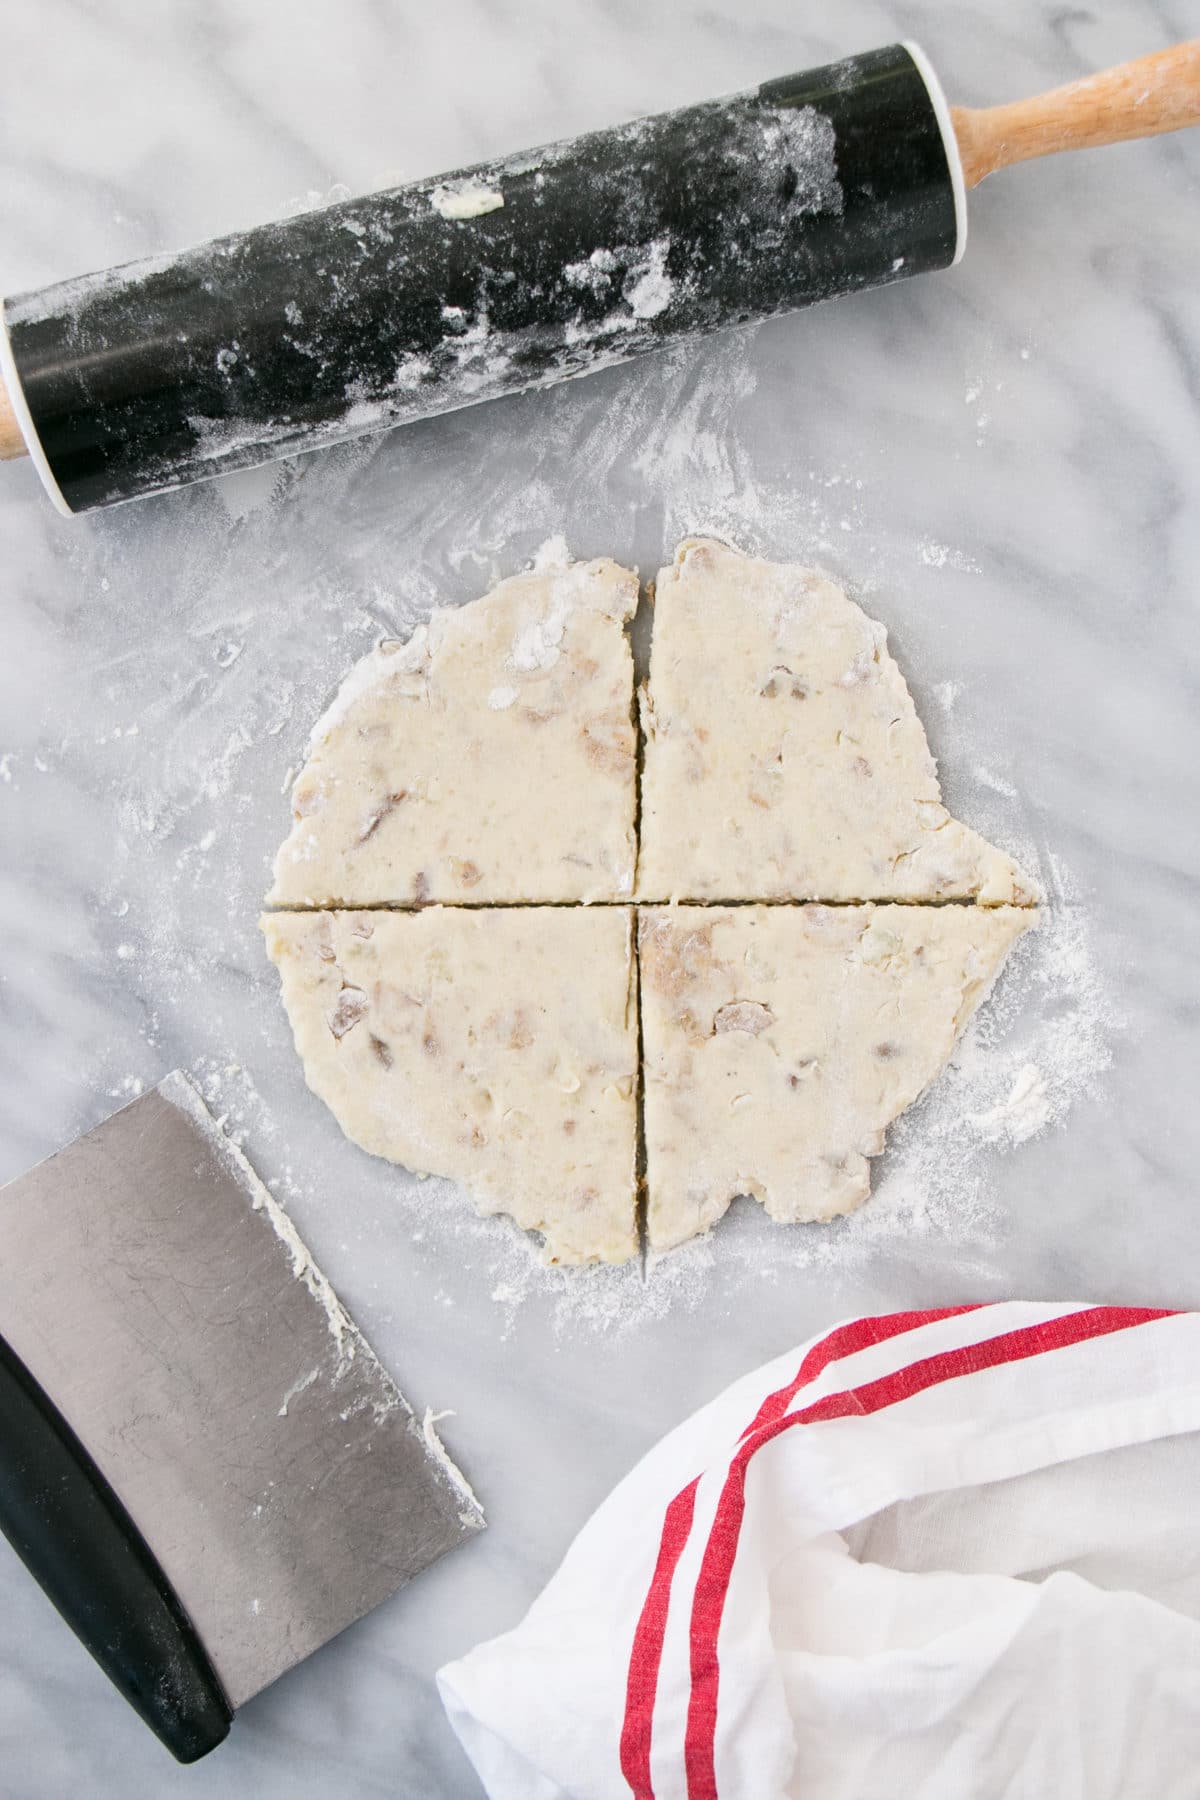 Scottish Potato Scones being made with a rolling pin